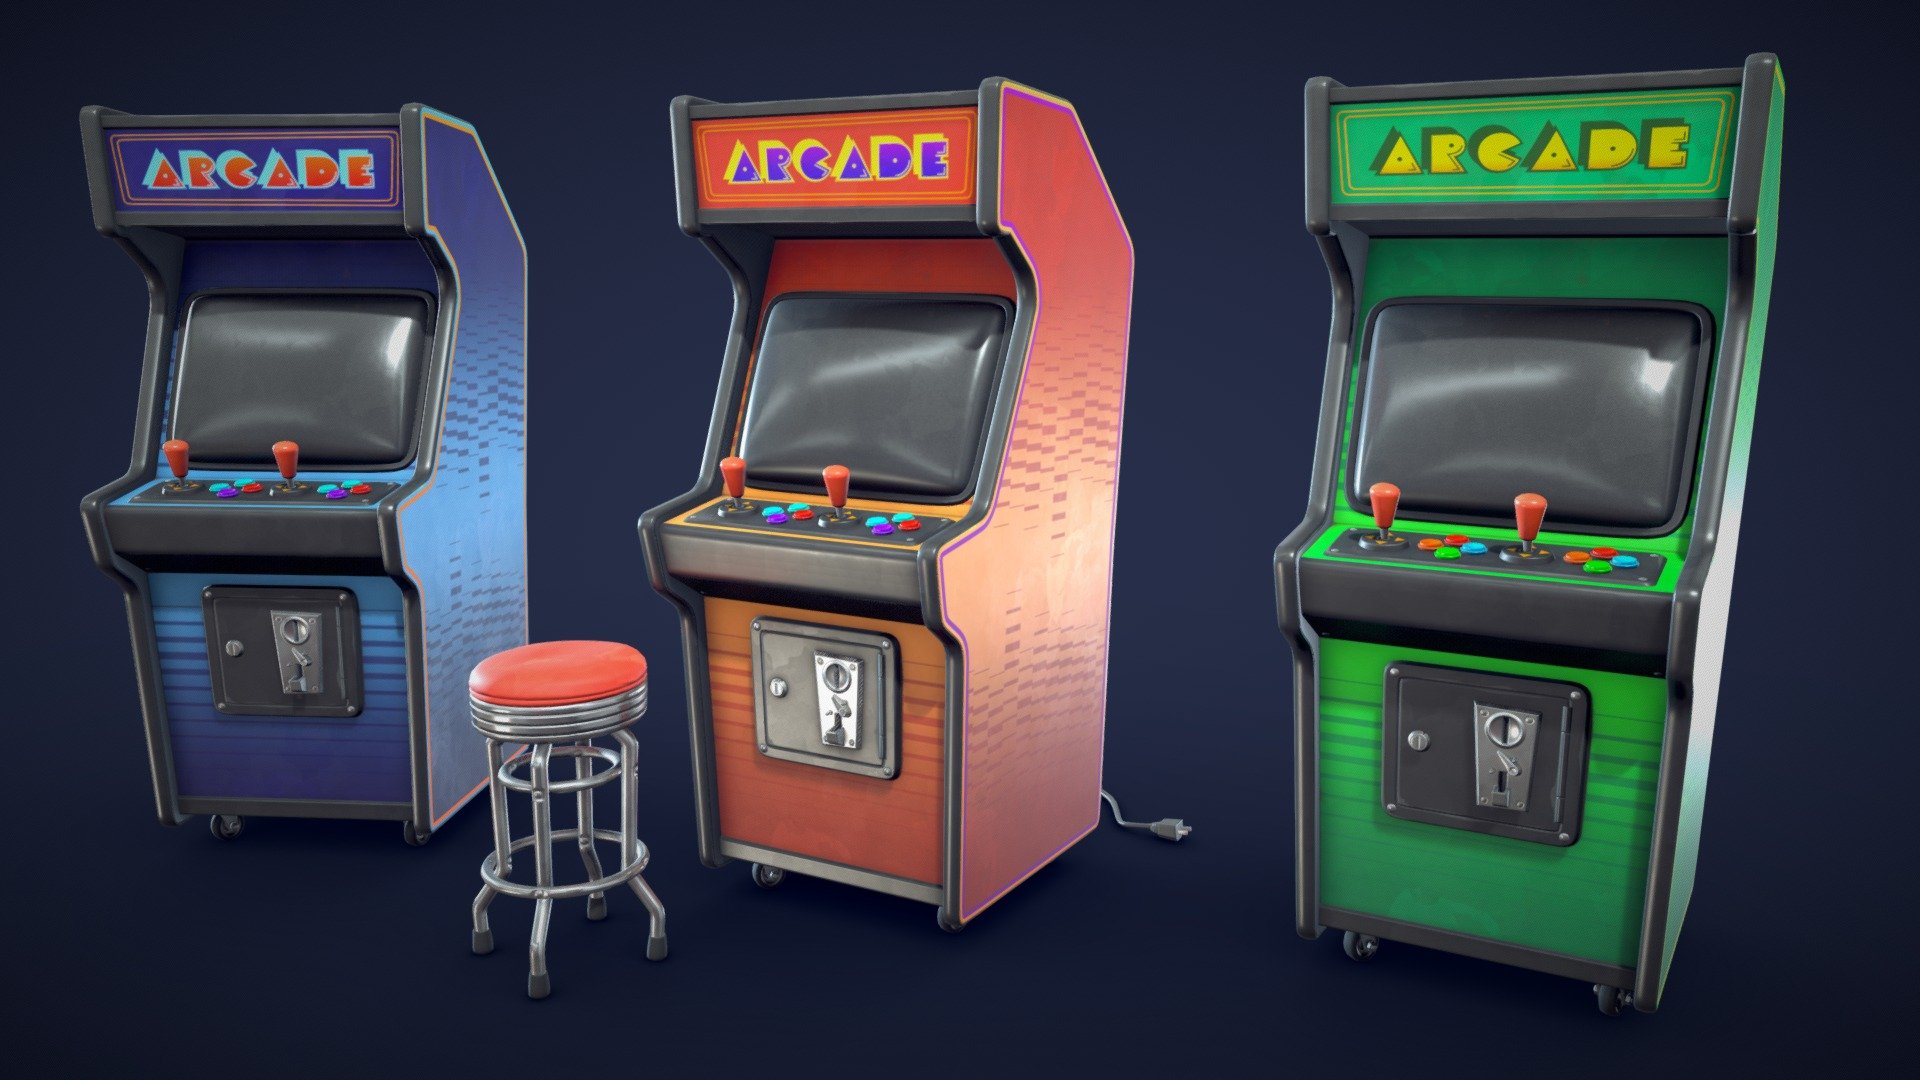 A 3D model of a retro-style arcade machine and arcade chair.
The asset also comes with several textures and materials that can be customized.
Whether you want to create a nostalgic arcade scene, a futuristic cyberpunk environment, or a whimsical fantasy world, this asset will add some fun and flair to your project.

Model information:




Optimized low-poly assets for real-time usage.

Optimized and clean UV mapping.

2K and 4K textures for the assets are included.

Compatible with Unreal Engine, Unity and similar engines.

Additional unposed arcade machine is included.

Additional cable meshes are included.

3 color variation textures are included.

All scene assets are included in a separate file as well. 

Here is a look at the assets included in this pack:
 - Stylized Arcade Machine - Low Poly - Buy Royalty Free 3D model by Lars Korden (@Lark.Art) 3d model